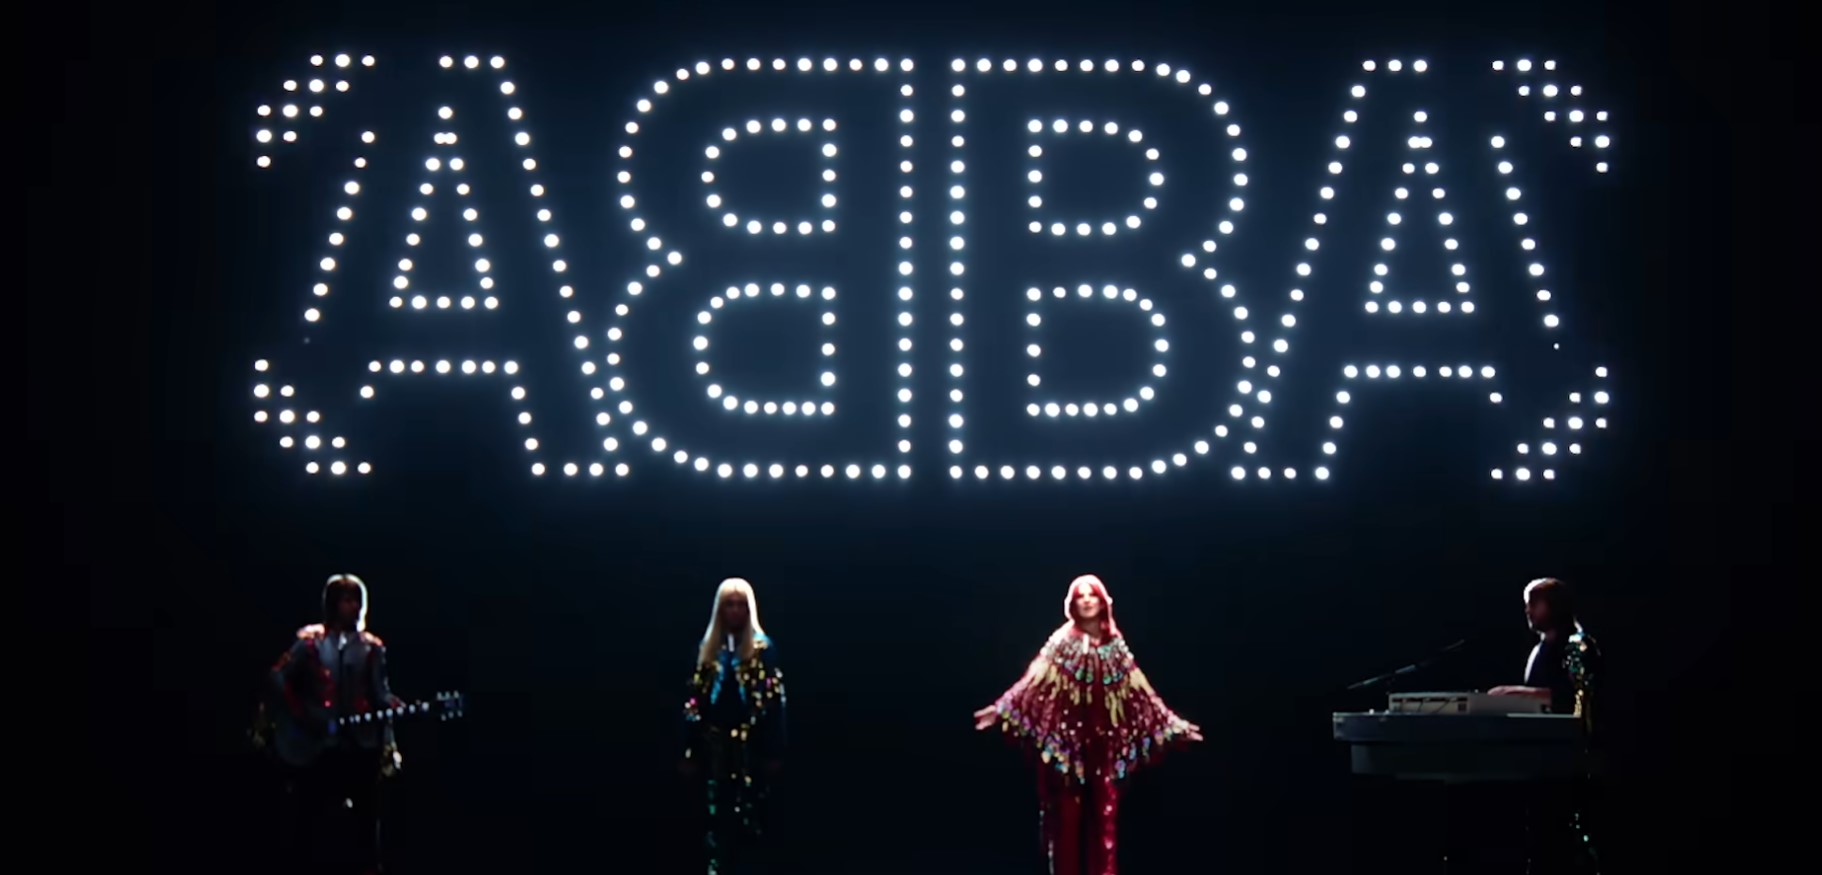 'ABBA Voyage' Gives New Life To Pop Music In The Digital Era